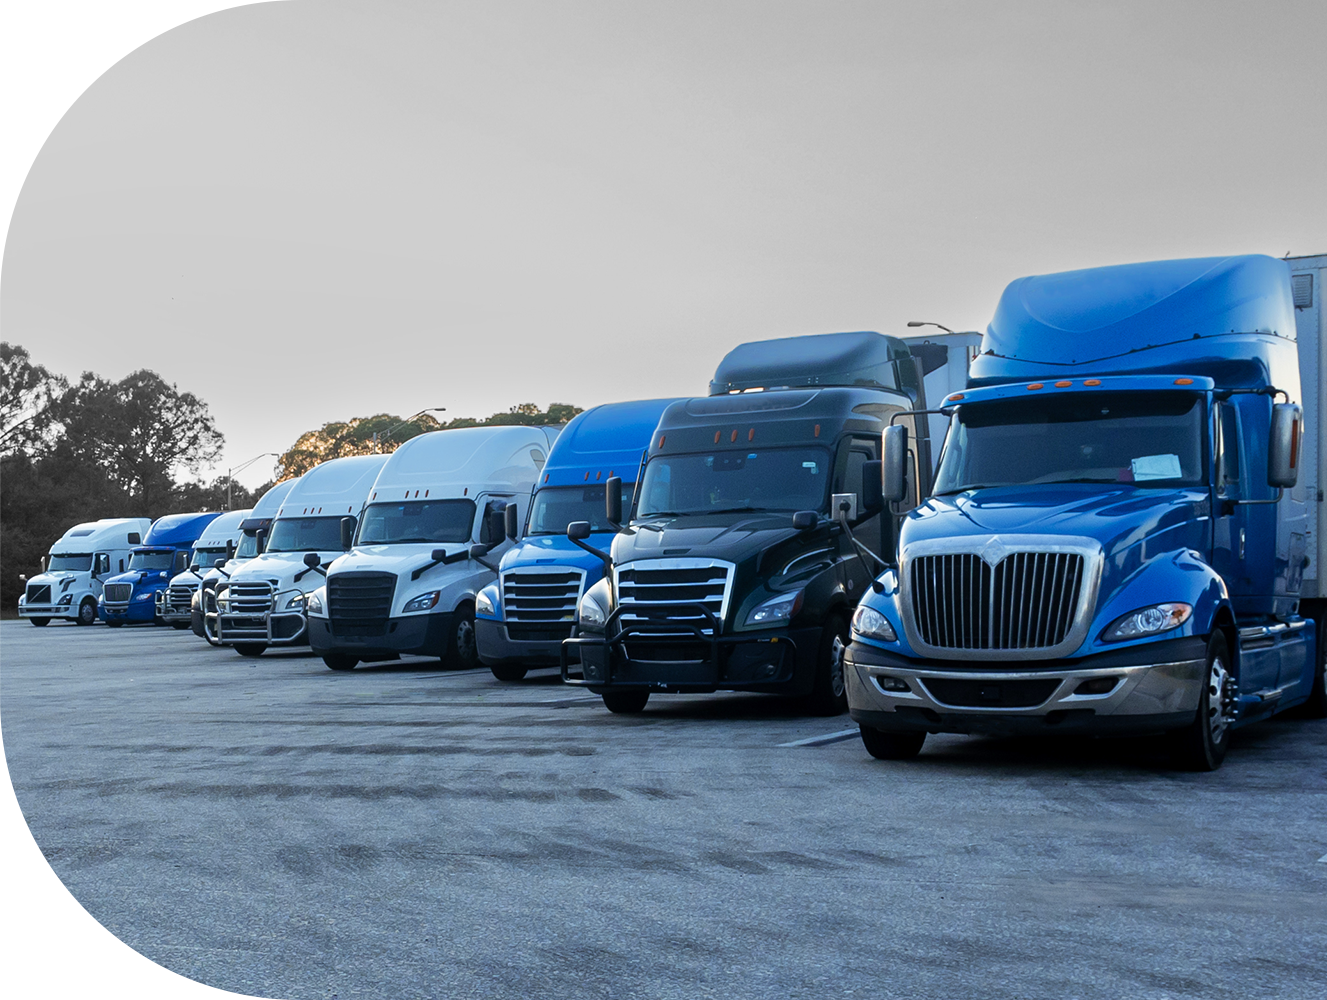 Stryder Logistics North American partner fleet with blue and white tractors and trailers including parked dry vans, reefers, flatbeds, roll-tites, chassis and more